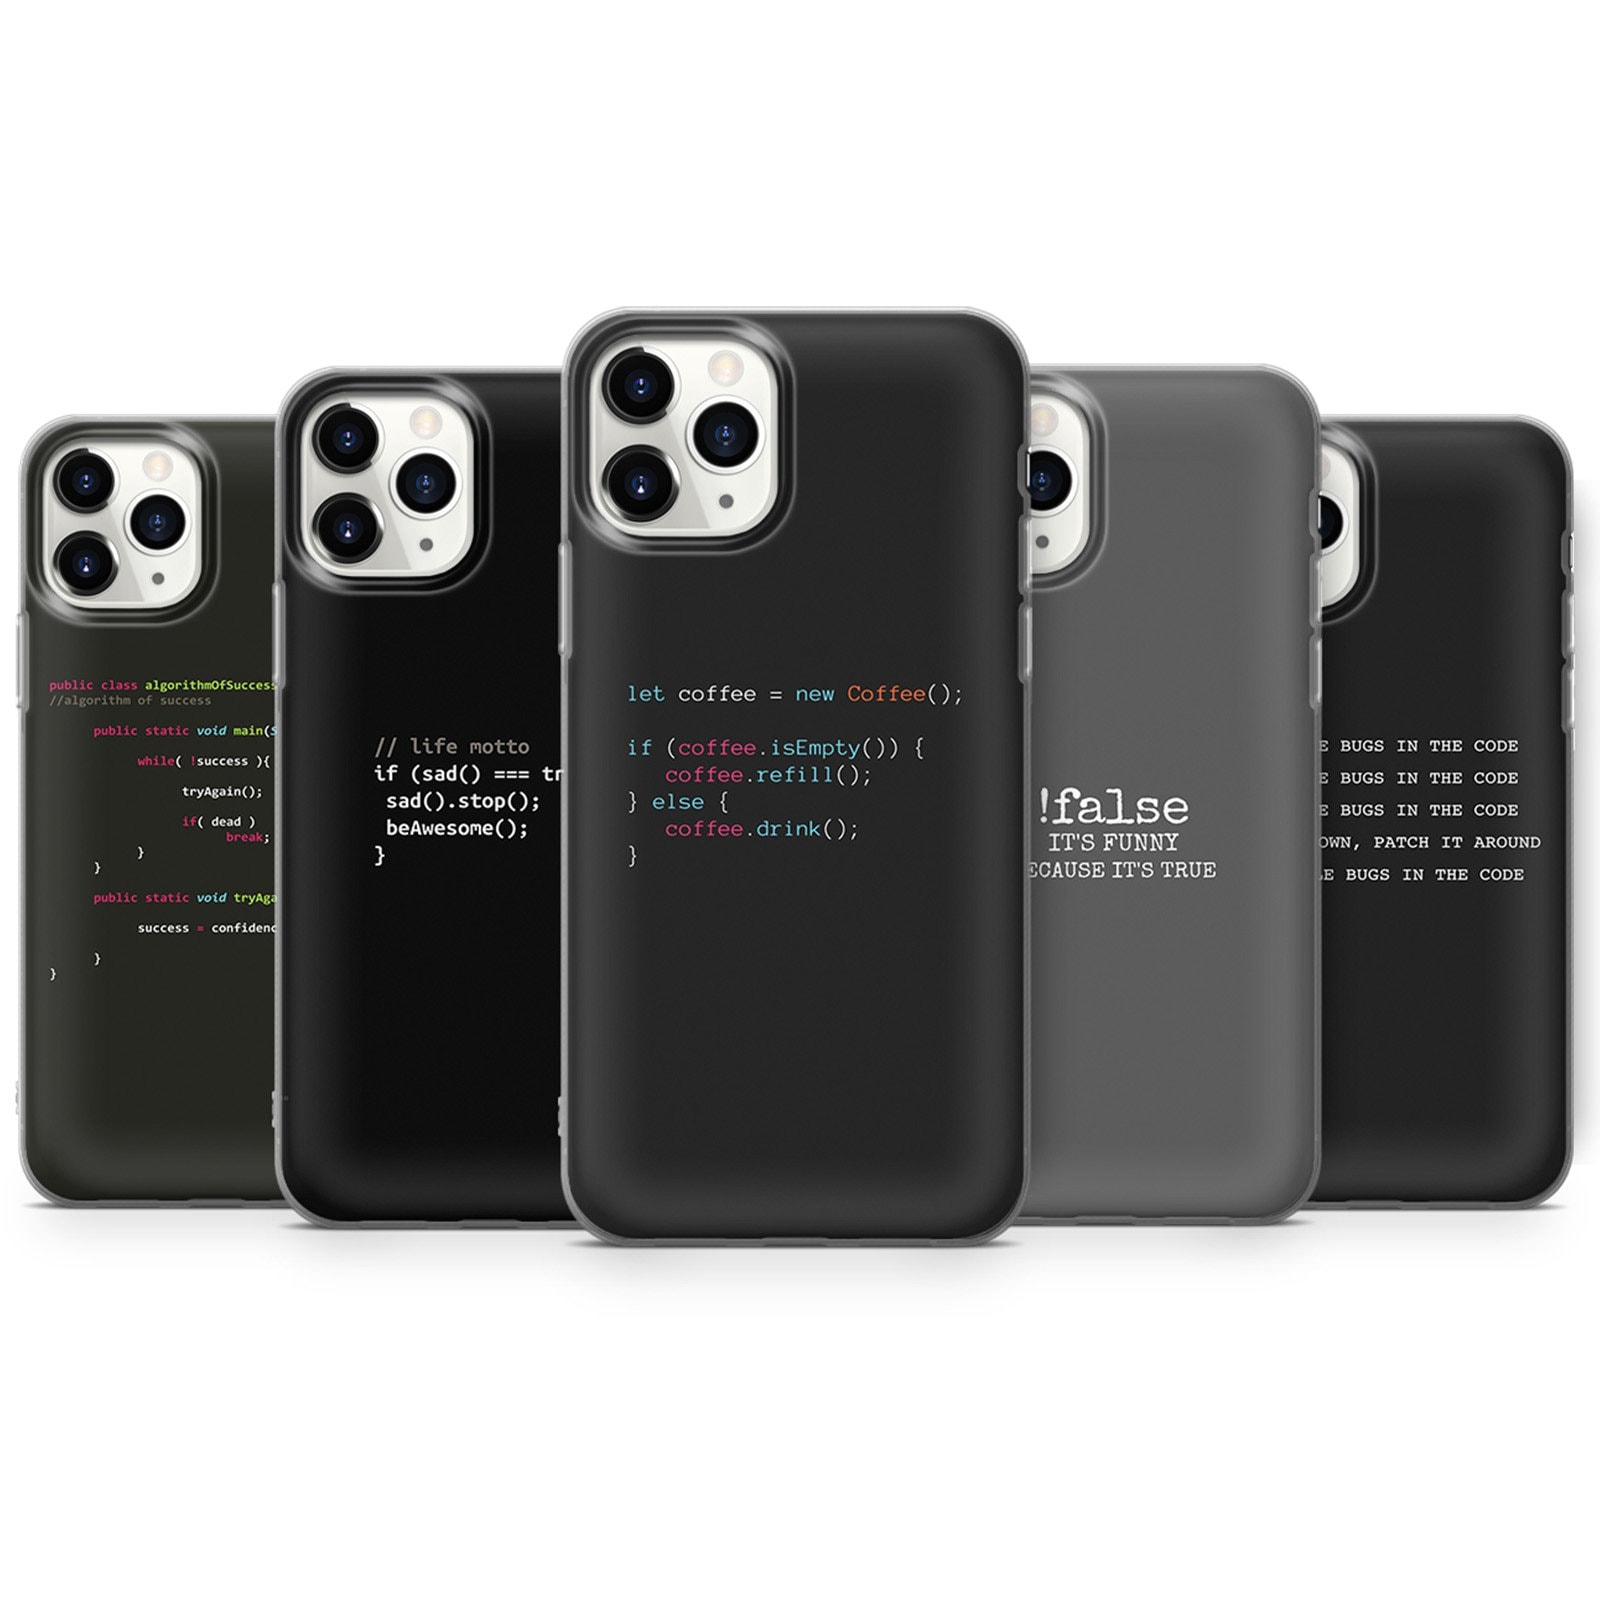 The Coder’s Novelty Phone Case